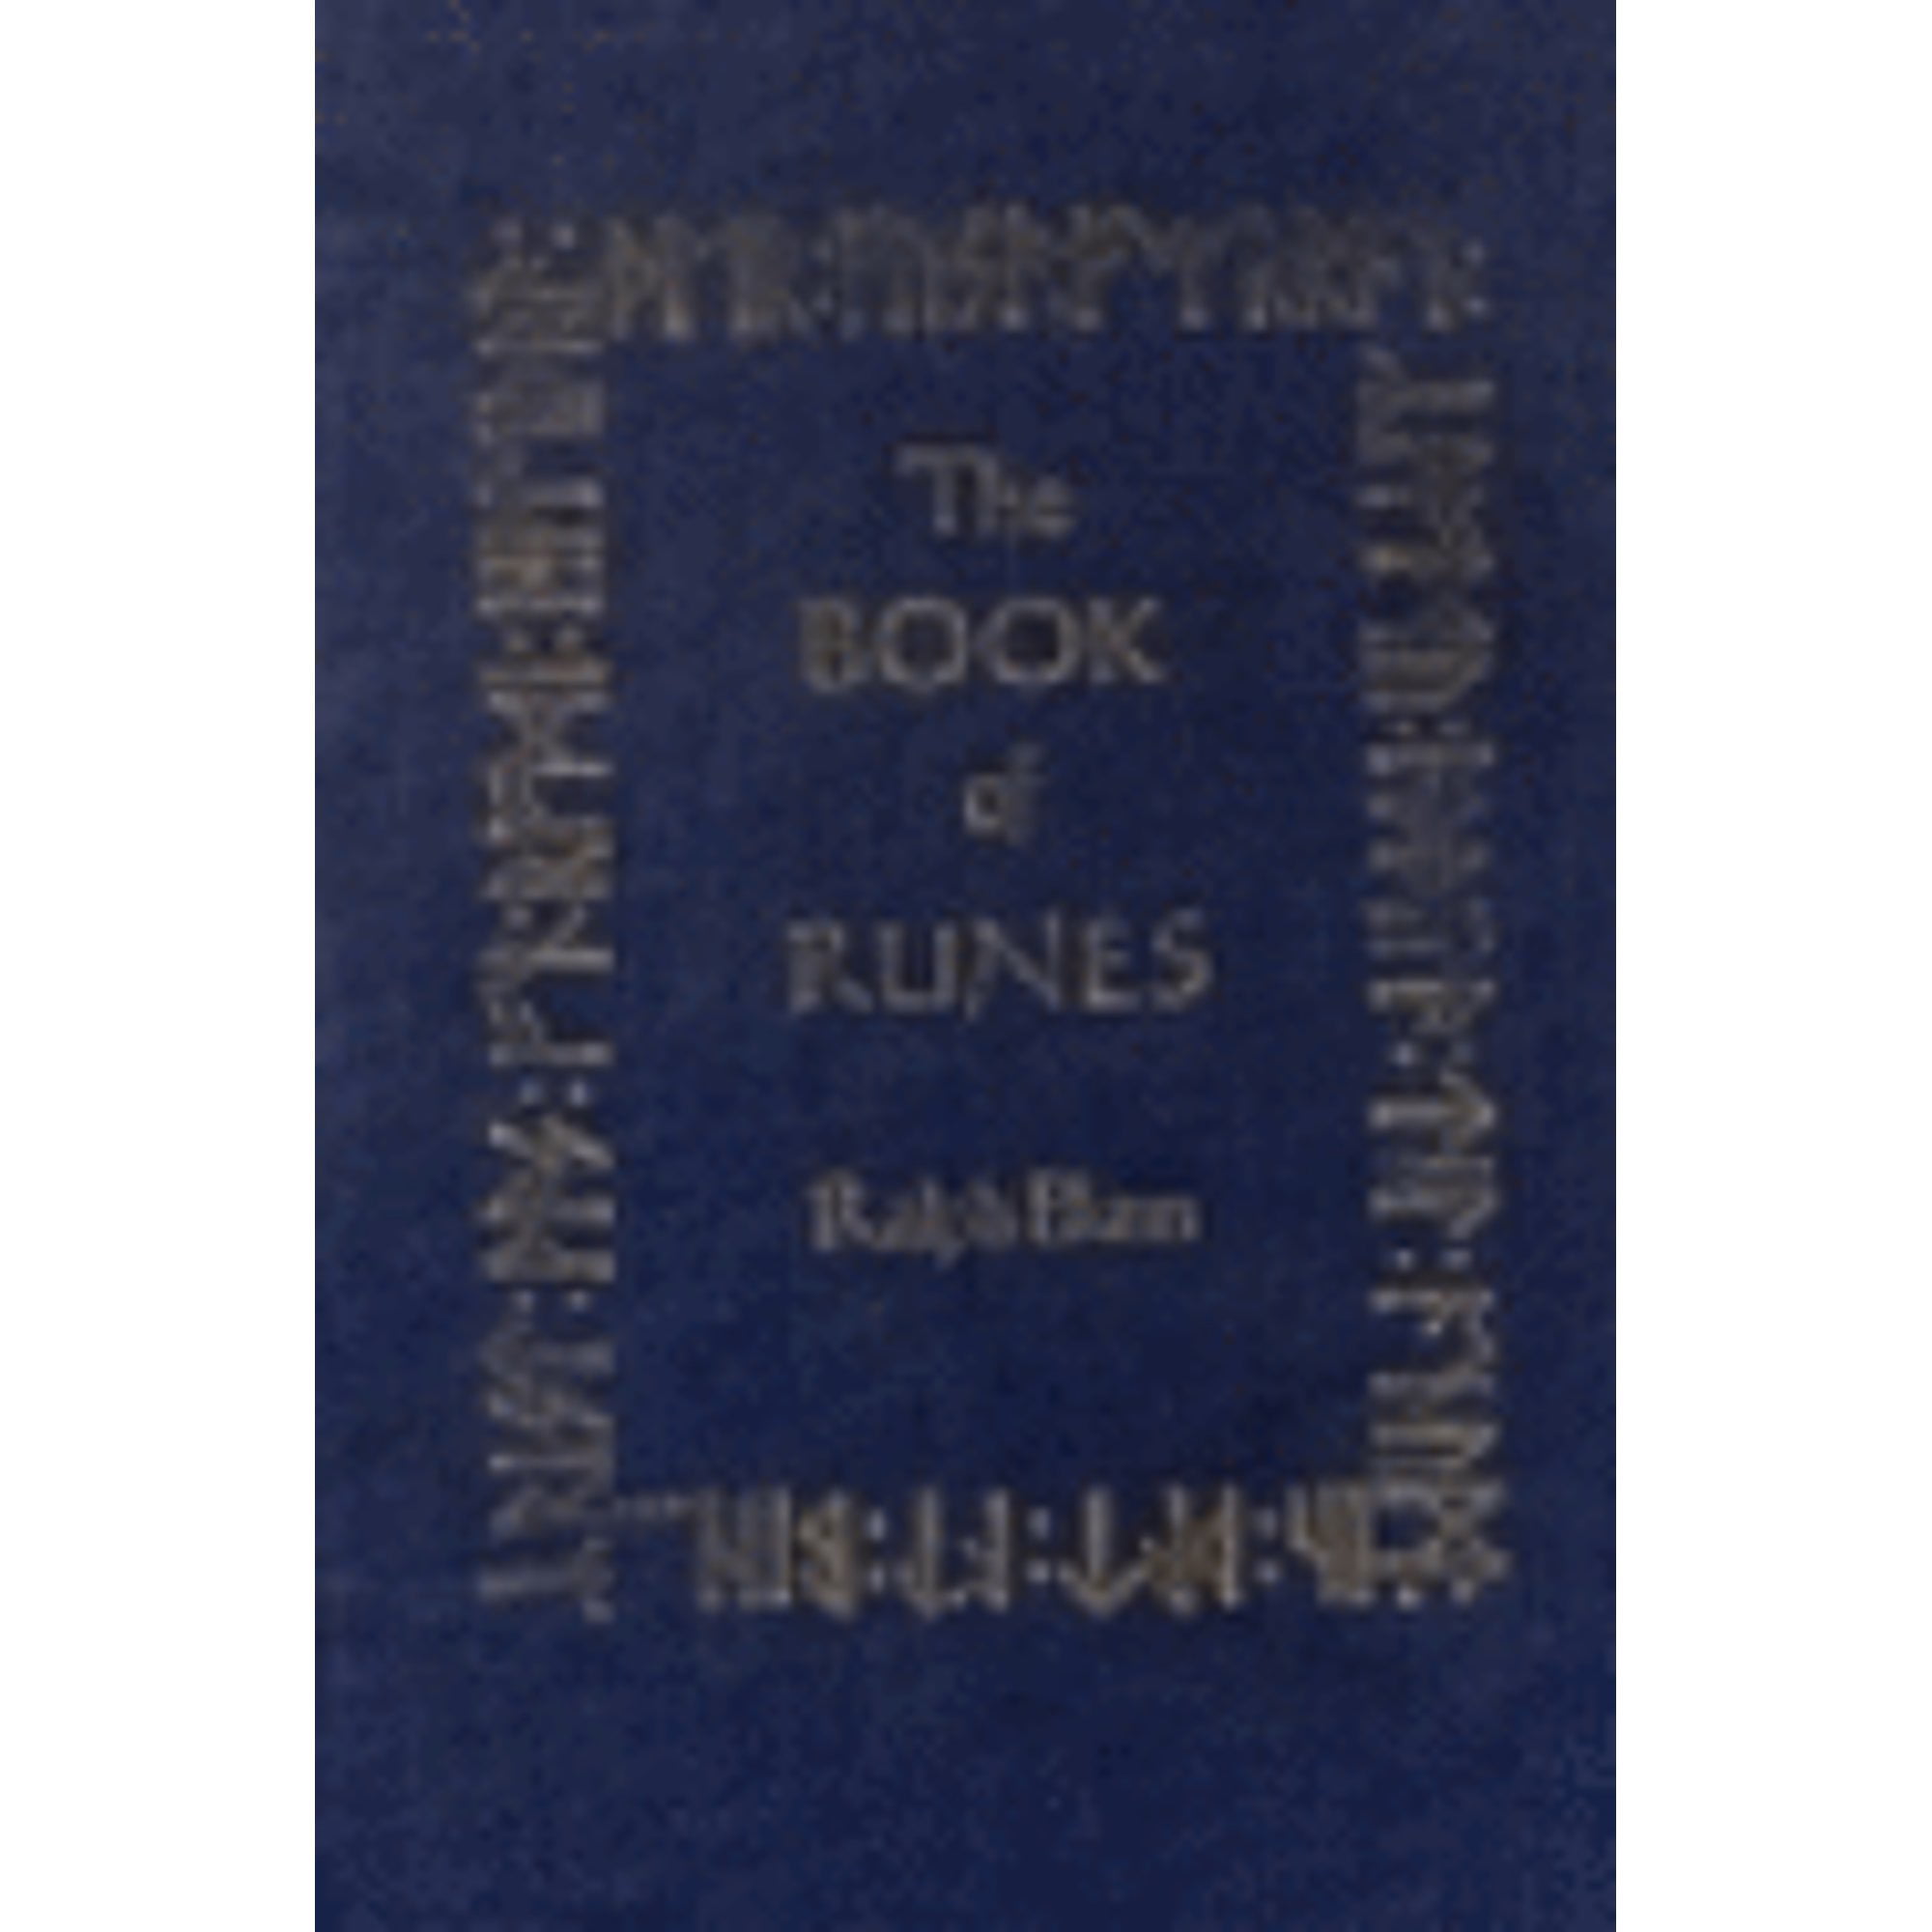 The Book of Runes: A Handbook for the Use of an Ancient Oracle - The Viking  Runes